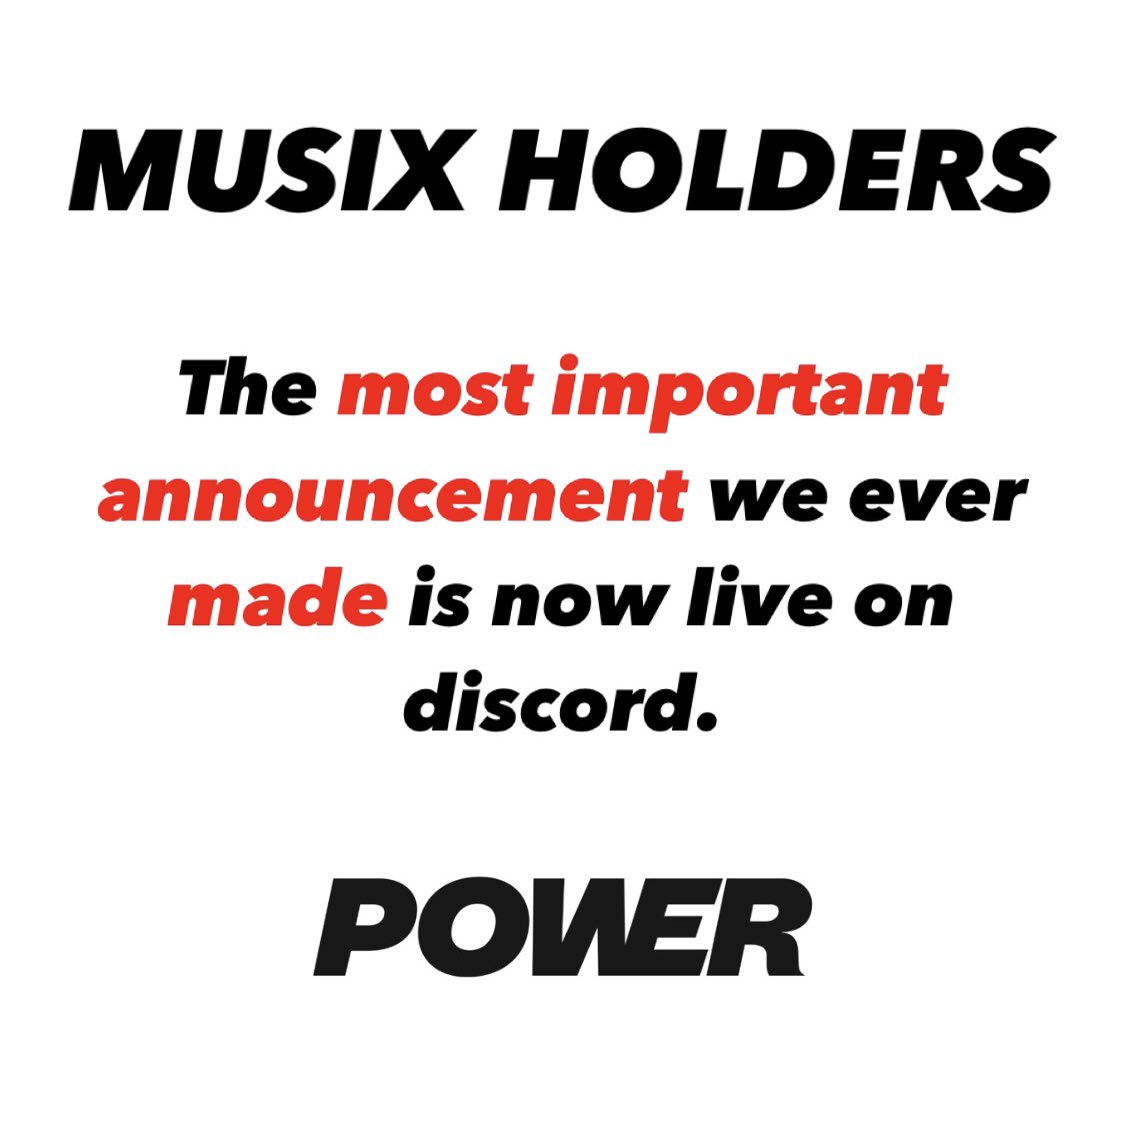 MUSIX HOLDERS: The most important announcement we ever made is now live on discord. discord.gg/MYAAjyGh Read it carefully.